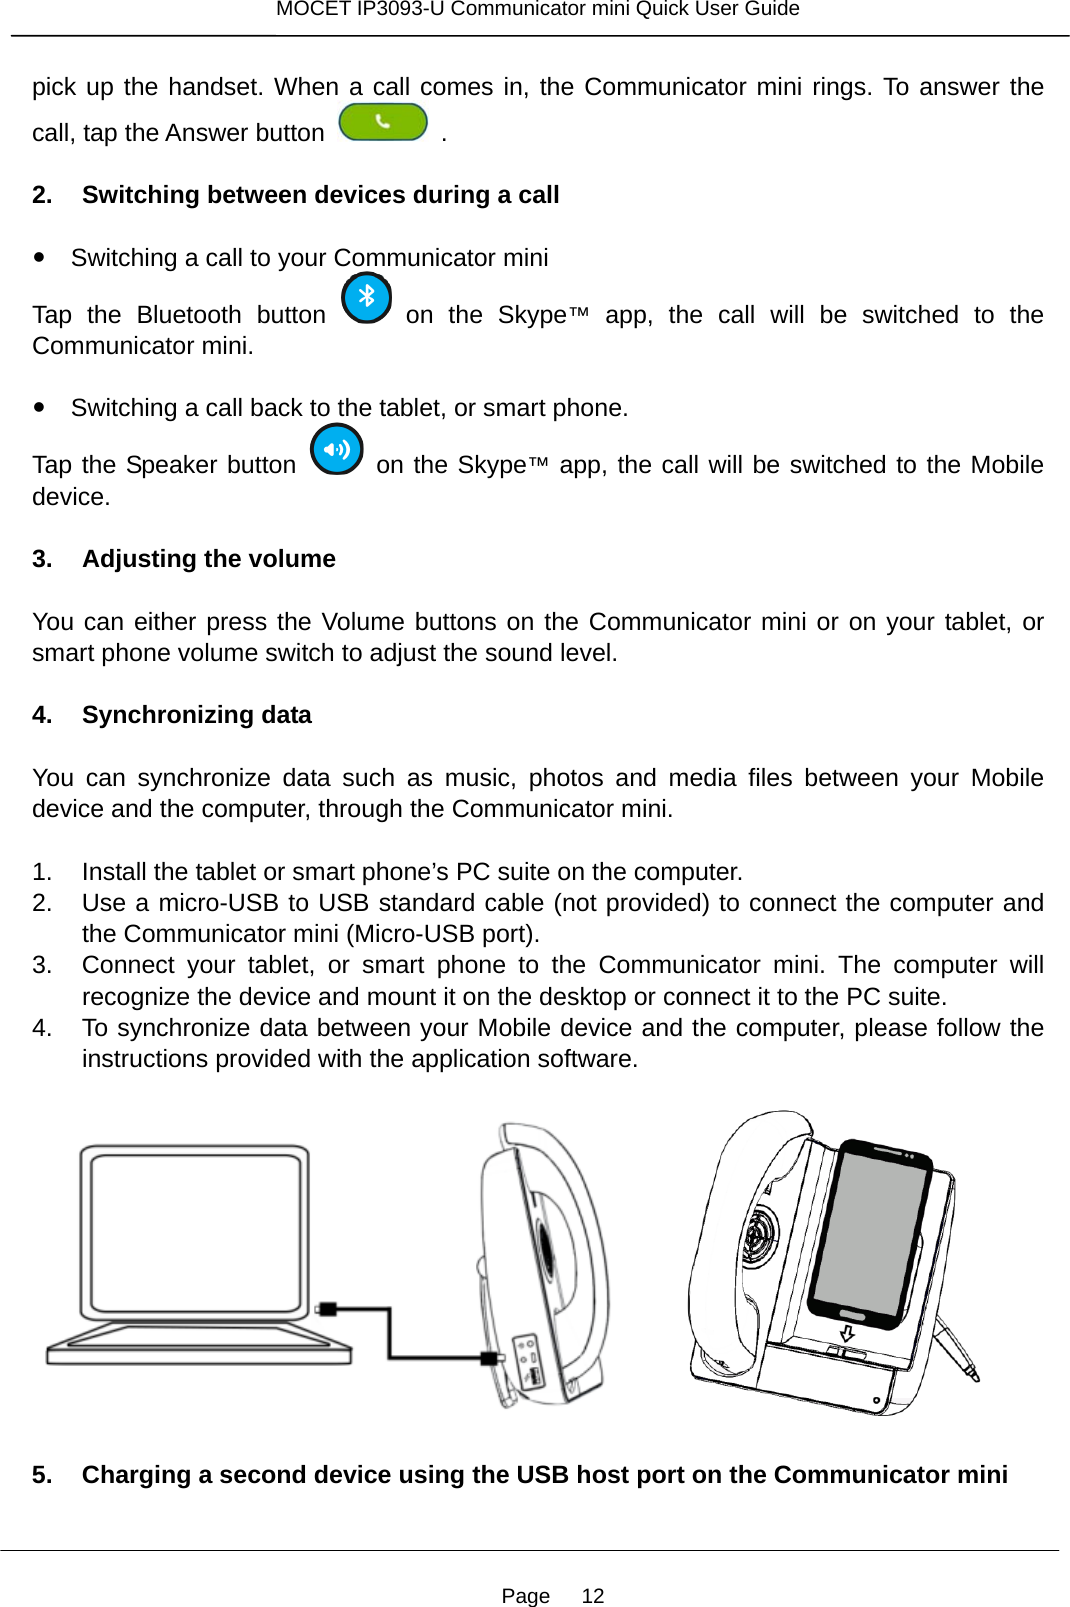 Page   12 MOCET IP3093-U Communicator mini Quick User Guide  pick up the handset. When a call comes in, the Communicator mini rings. To answer the call, tap the Answer button    .  2. Switching between devices during a call      Switching a call to your Communicator miniTap the Bluetooth button   on the Skype™ app, the call will be switched to the Communicator mini.        Switching a call back to the tablet, or smart phone.Tap the Speaker button   on the Skype™ app, the call will be switched to the Mobile device.  3. Adjusting the volume  You can either press the Volume buttons on the Communicator mini or on your tablet, or smart phone volume switch to adjust the sound level.      4. Synchronizing data  You can synchronize data such as music, photos and media files between your Mobile device and the computer, through the Communicator mini.  1.  Install the tablet or smart phone’s PC suite on the computer. 2.  Use a micro-USB to USB standard cable (not provided) to connect the computer and the Communicator mini (Micro-USB port). 3.  Connect your tablet, or smart phone to the Communicator mini. The computer will recognize the device and mount it on the desktop or connect it to the PC suite.   4.  To synchronize data between your Mobile device and the computer, please follow the instructions provided with the application software.         5. Charging a second device using the USB host port on the Communicator mini  